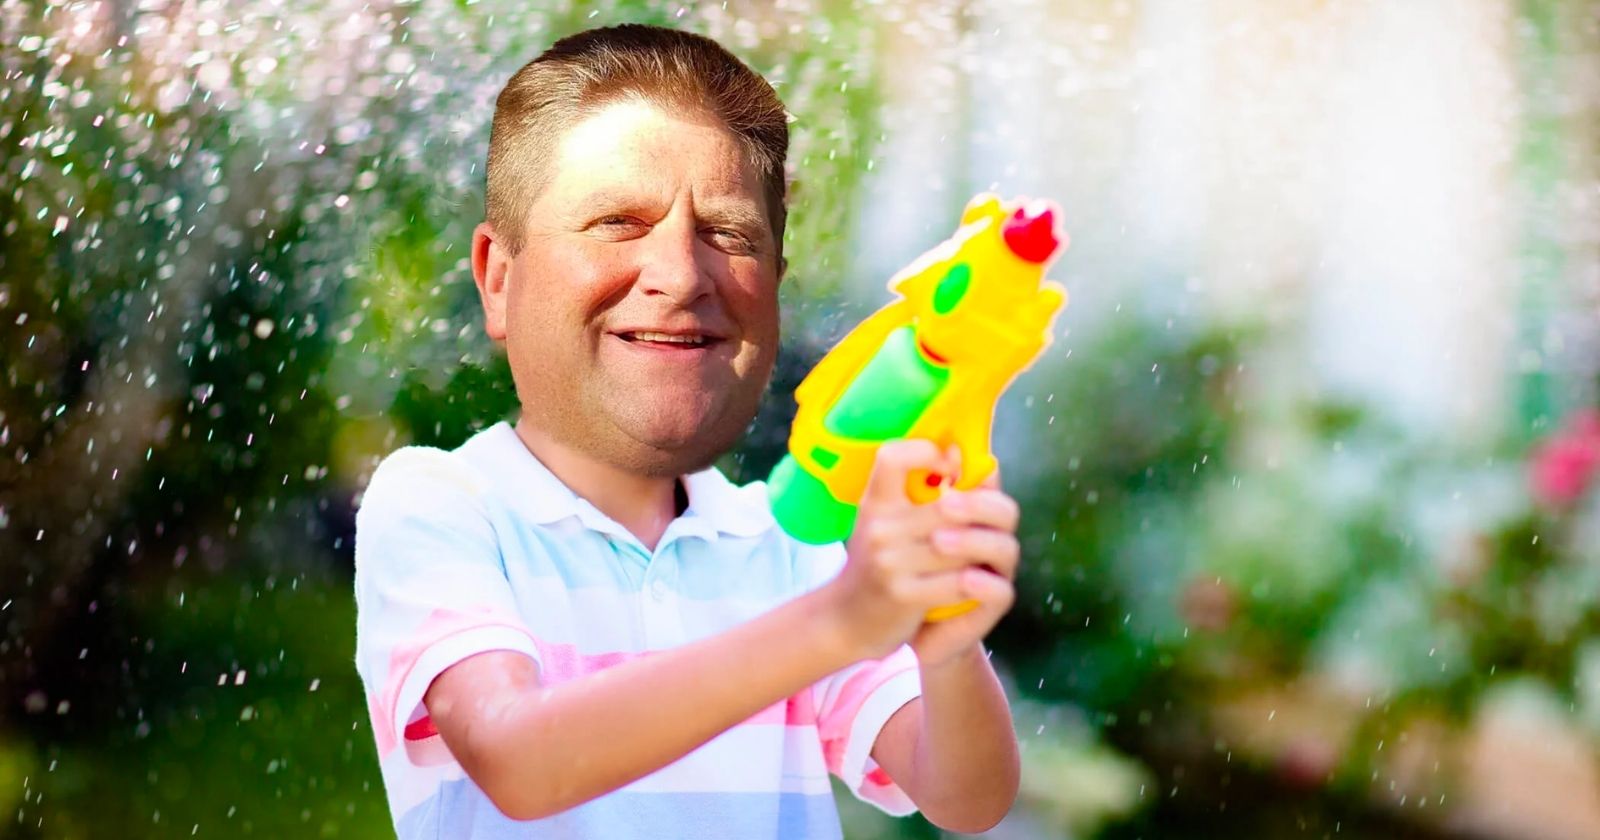 Willy Schraen can hunt at home with this water pistol offered by Peta